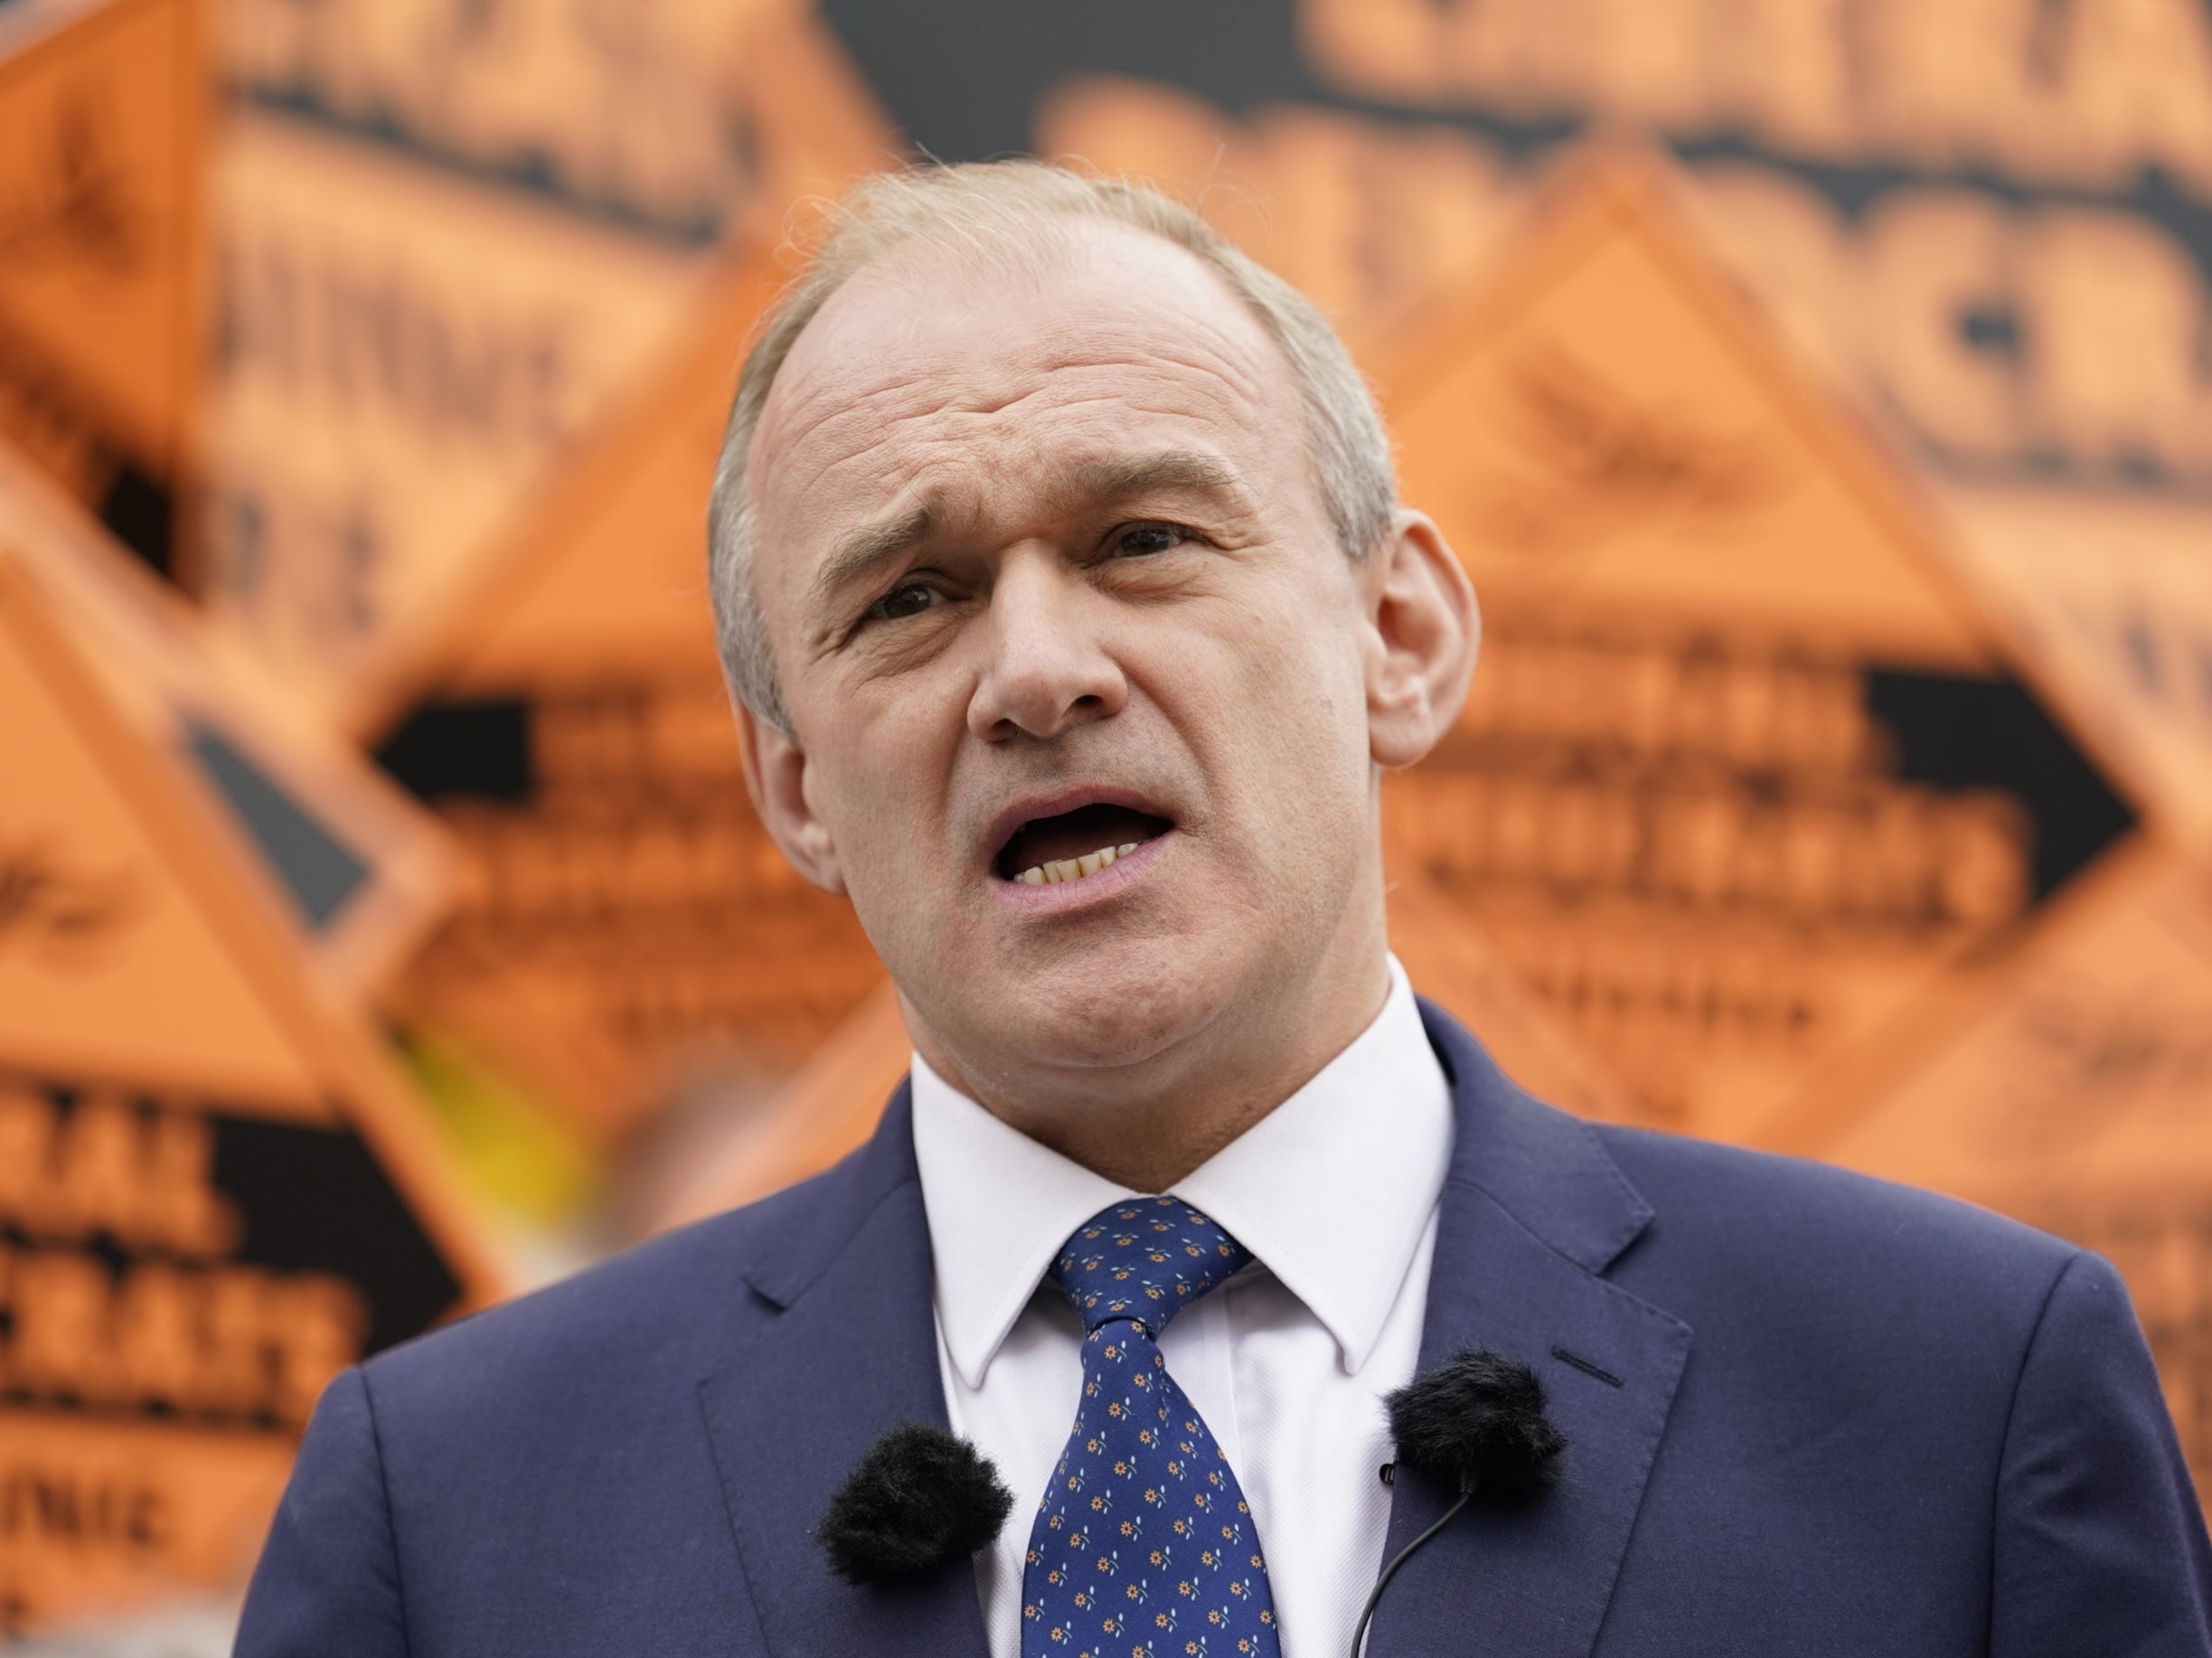 The Liberal Democrats’ low poll rating threatens to reduce the number of seats where the party might profit from any anti-Conservative mood